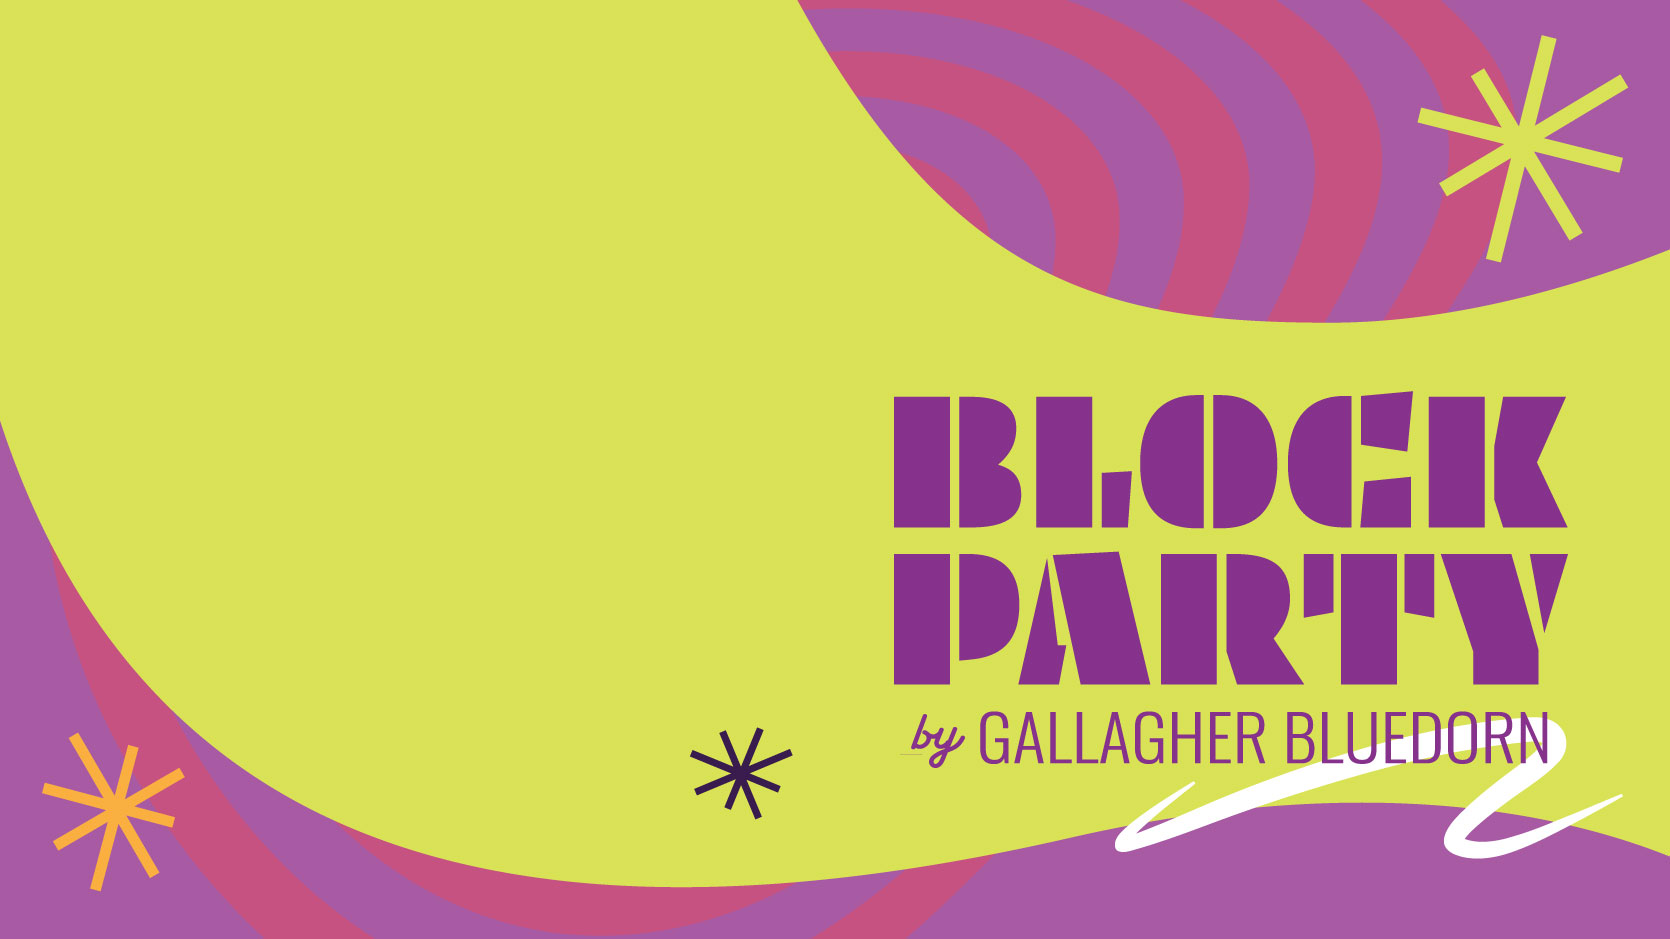 Text reads "BLOCK PARTY by Gallagher Bluedorn" on a playful background of lime green, orange, and purple with accenting starburst shapes